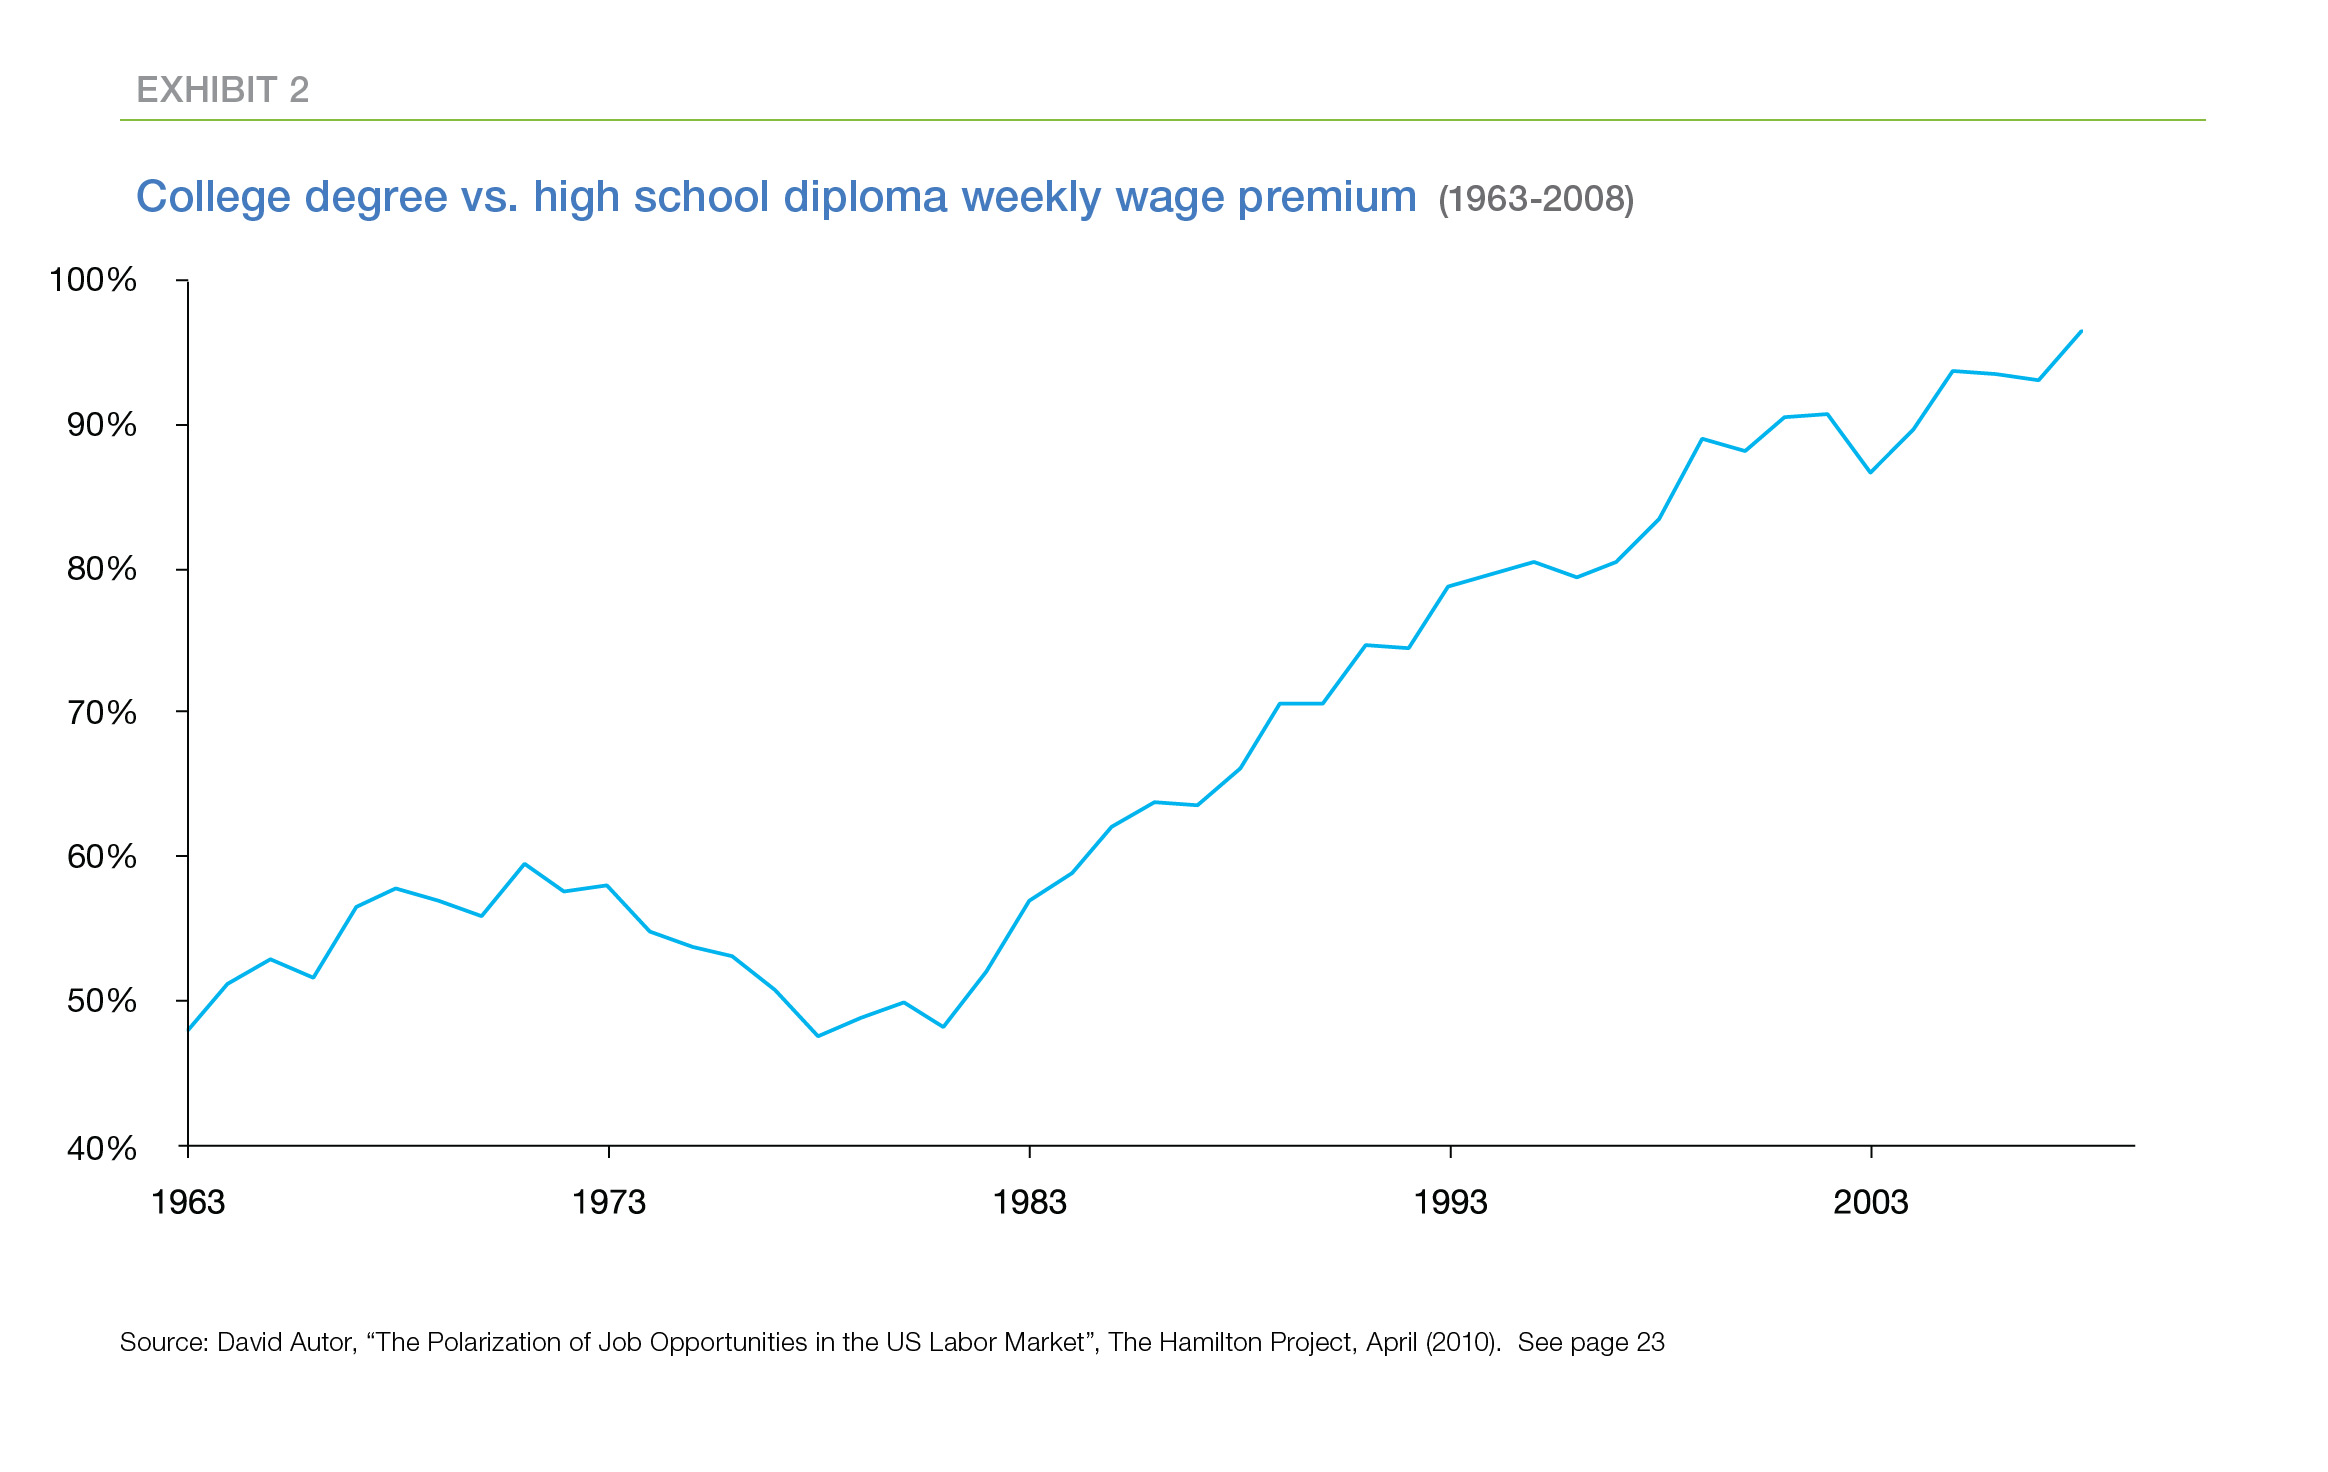 Line graph showing college degree vs. high school diploma weekly wage premium from 1963 to 2008